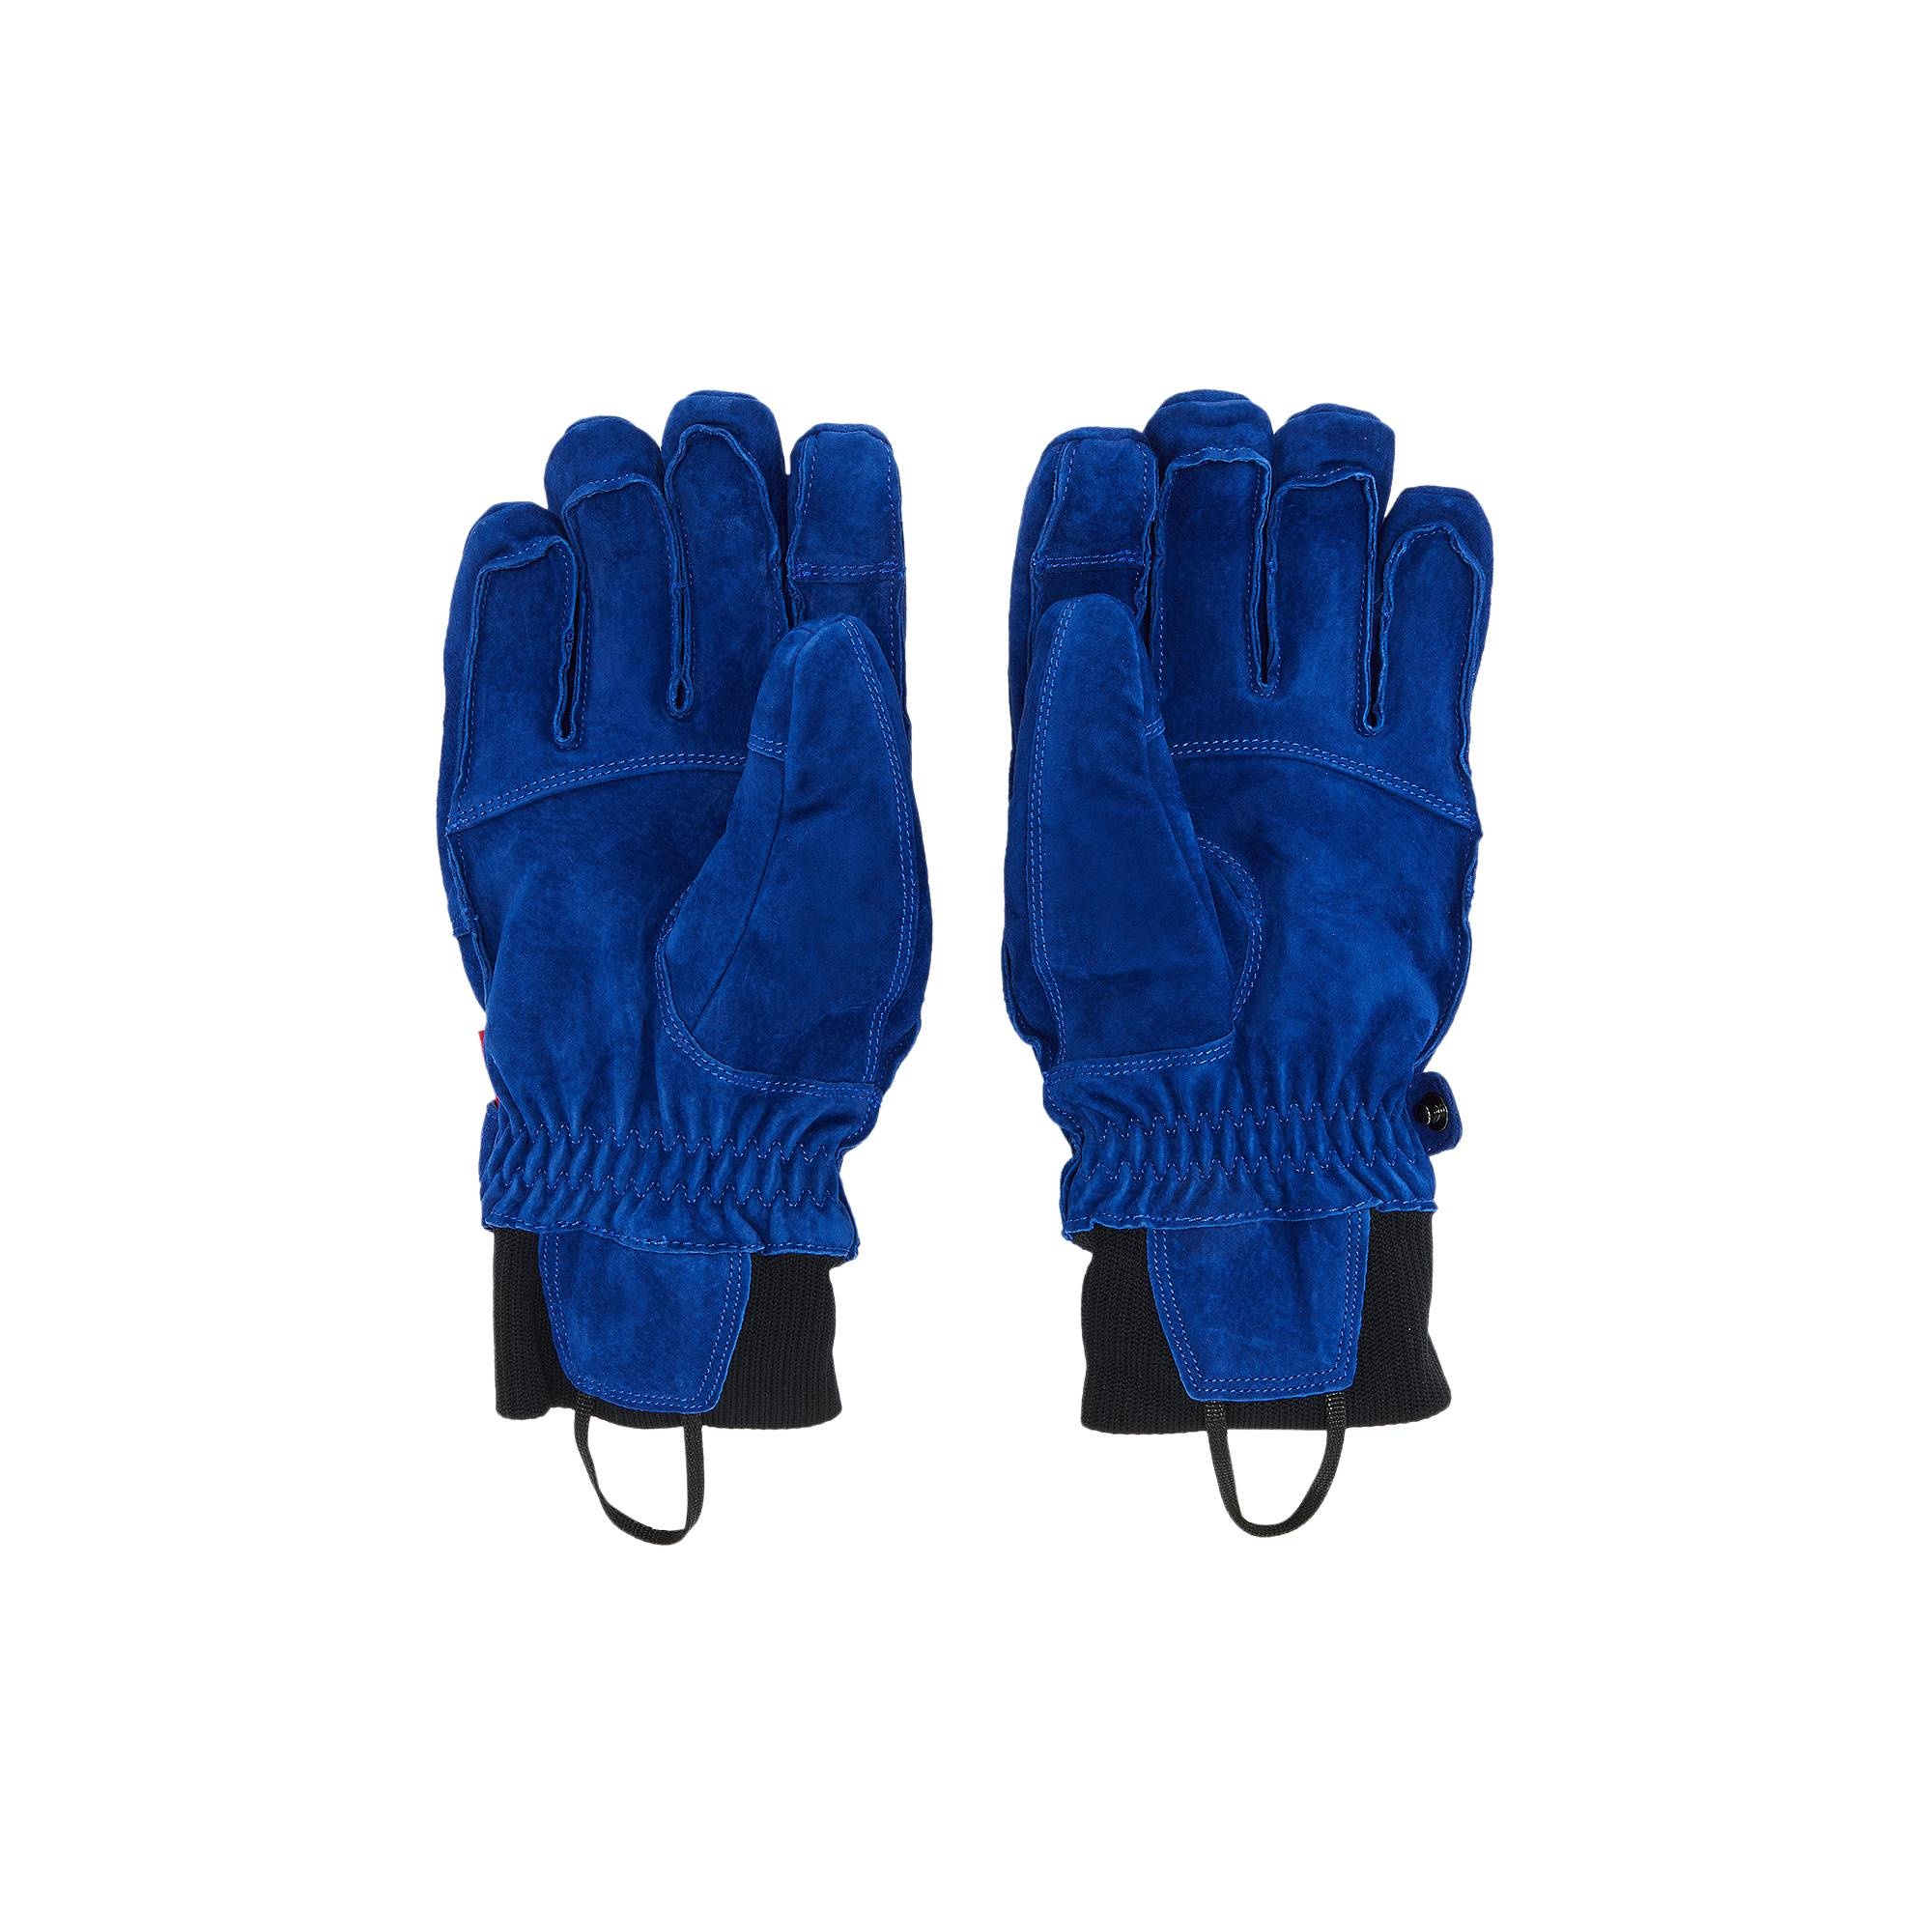 Supreme x The North Face Suede Glove 'Blue' - 2